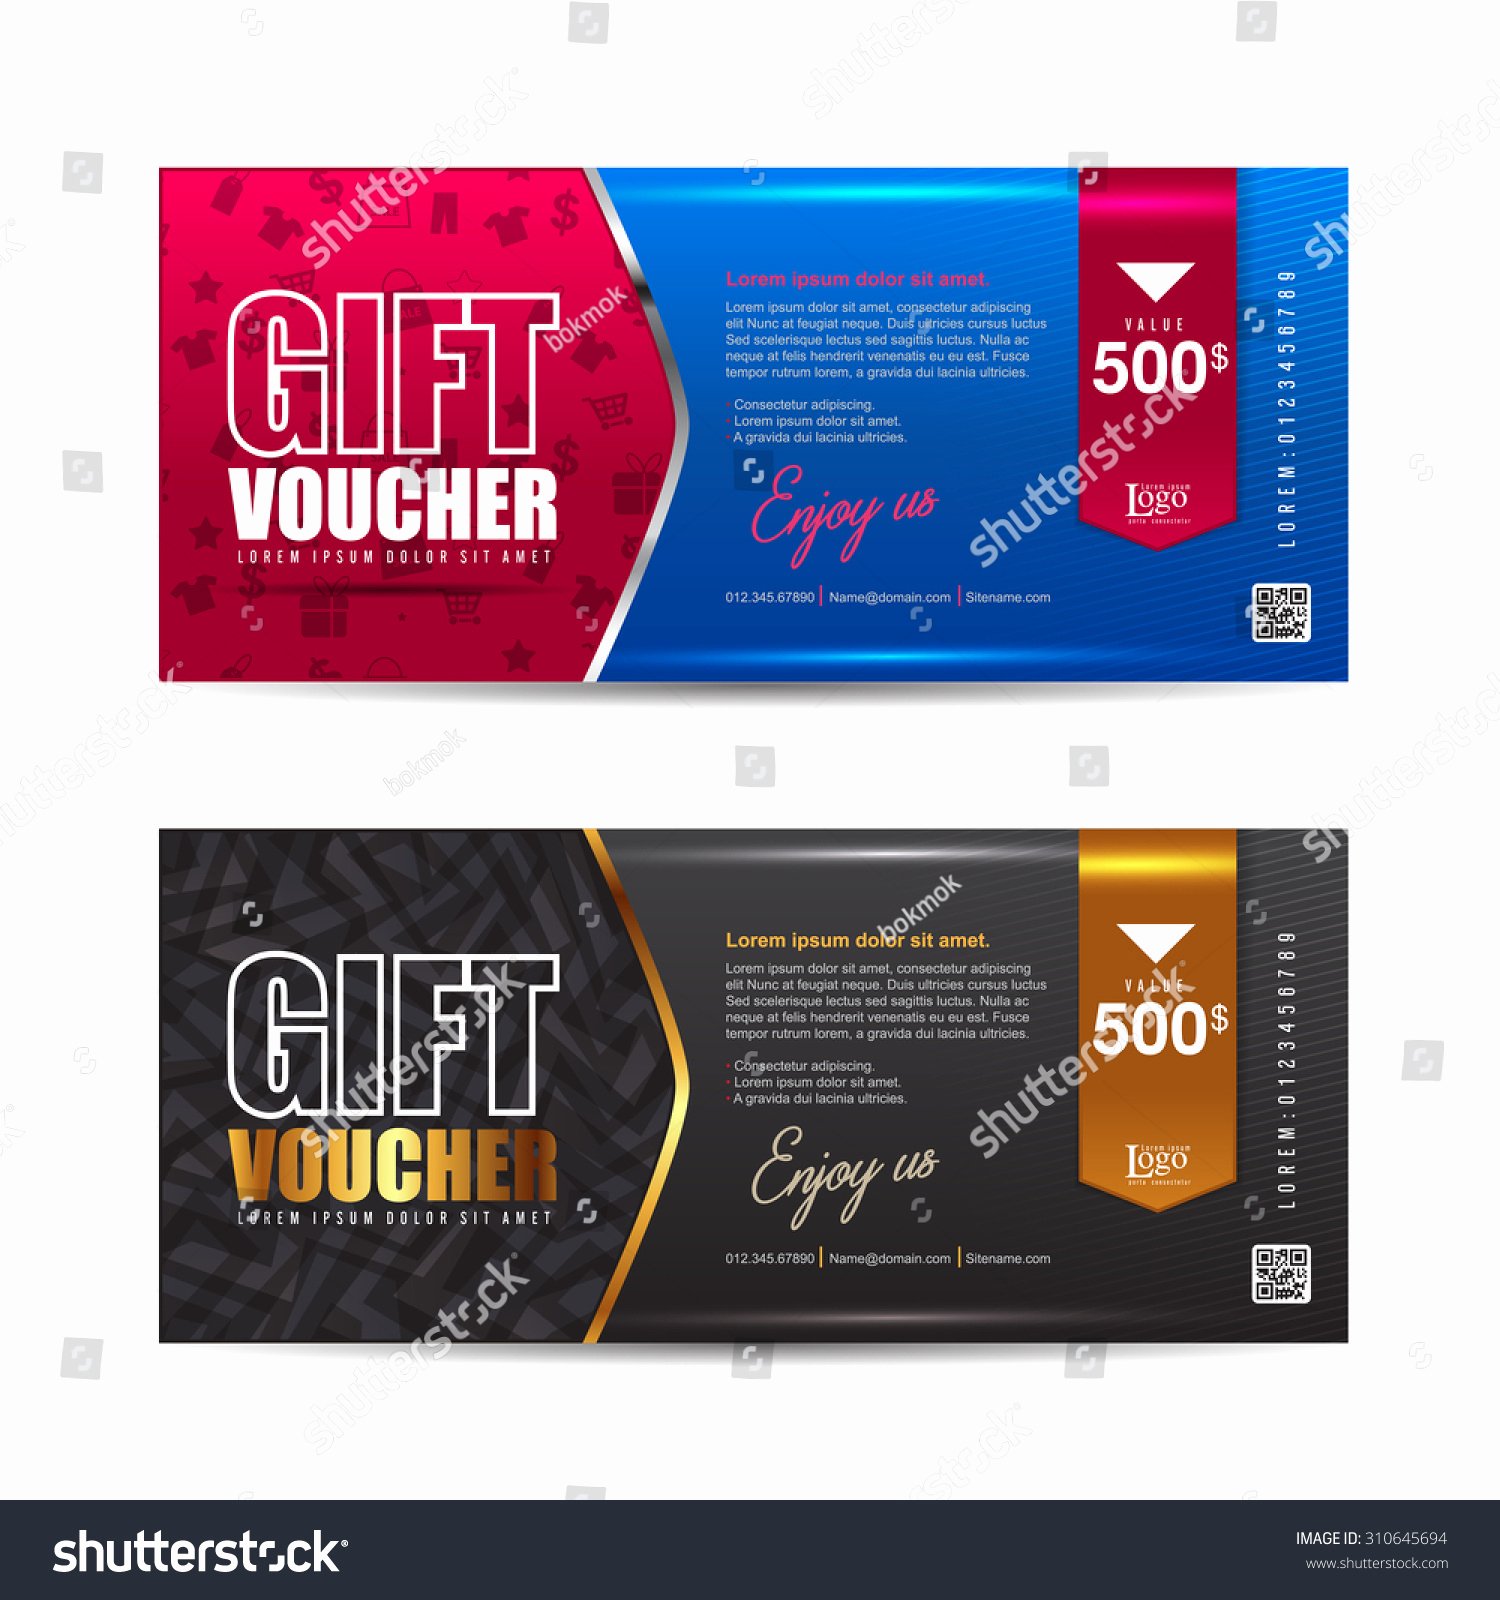 Cute Gift Certificate Template Lovely Vector Illustration Gift Voucher Template with Premium